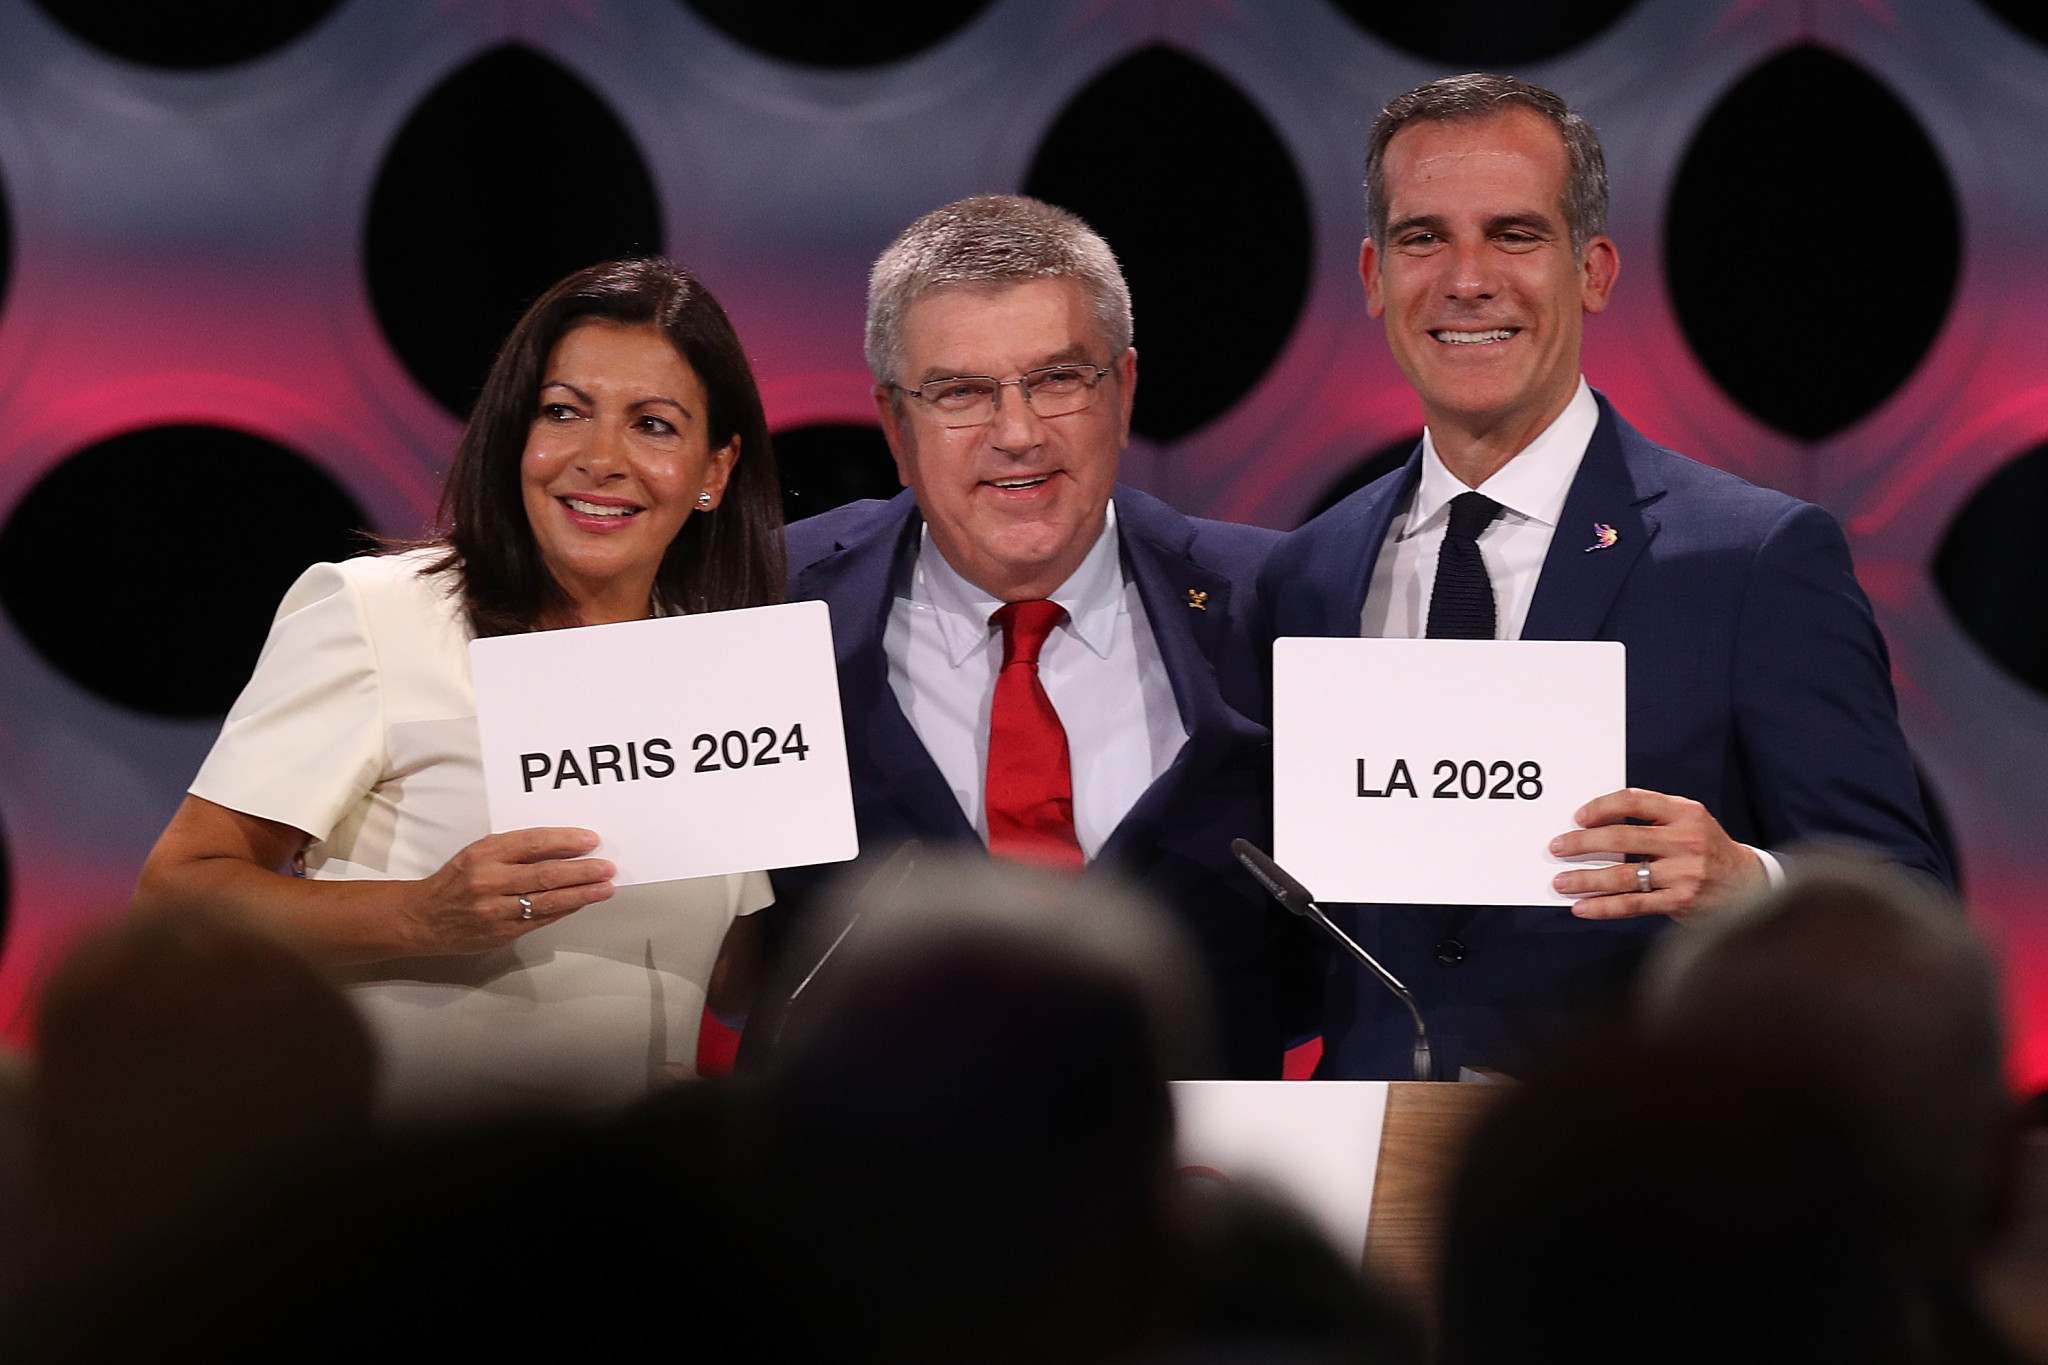 The last working group on the Olympic bidding process paved the way for the historic Paris 2024-Los Angeles 2028 double award ©Getty Images